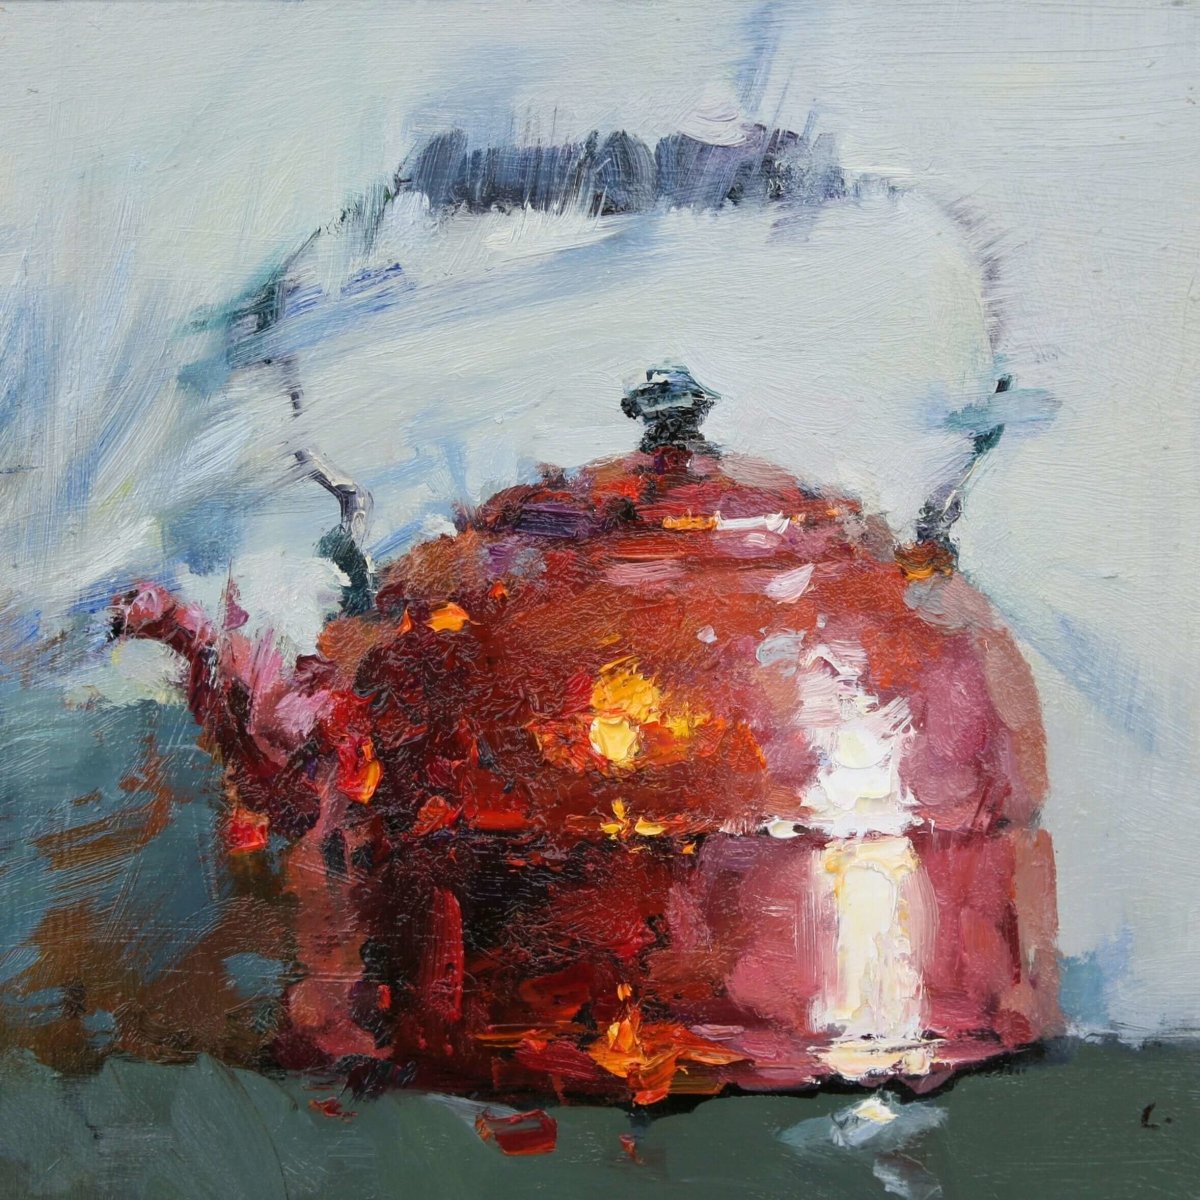 Copper Kettle by Ning Lee at LePrince Galleries